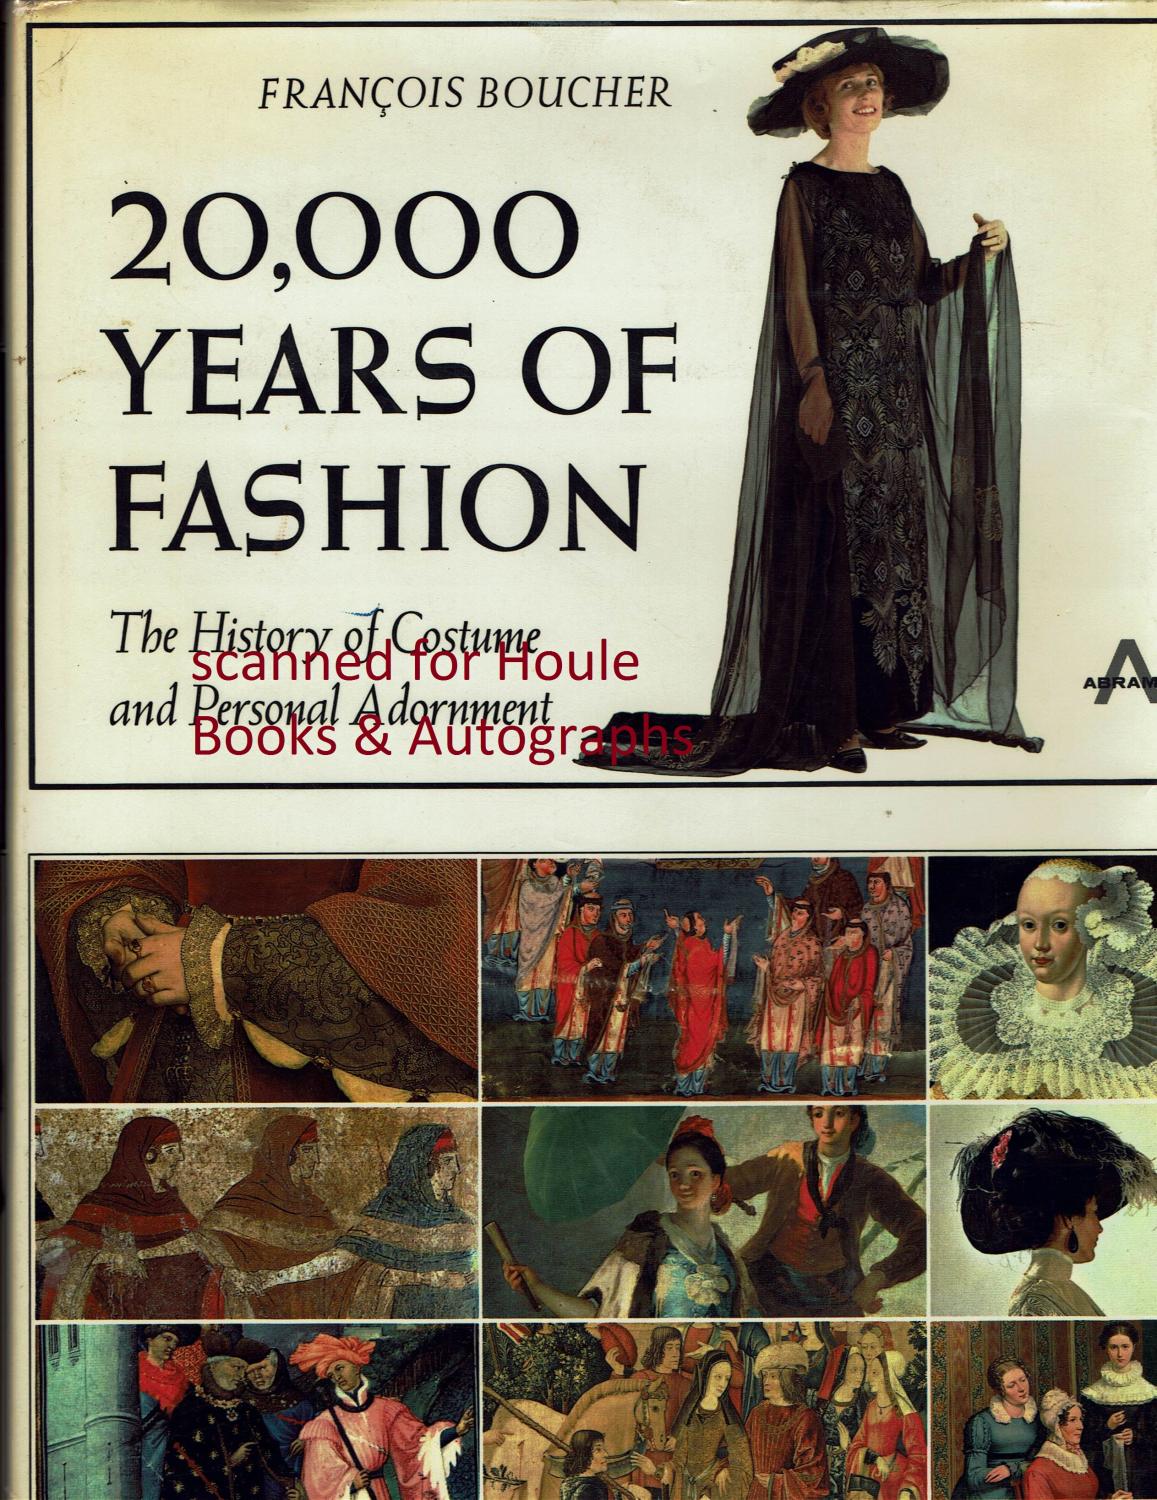 20,000 Years of Fashion: The History of Costume and Personal Adornment ...